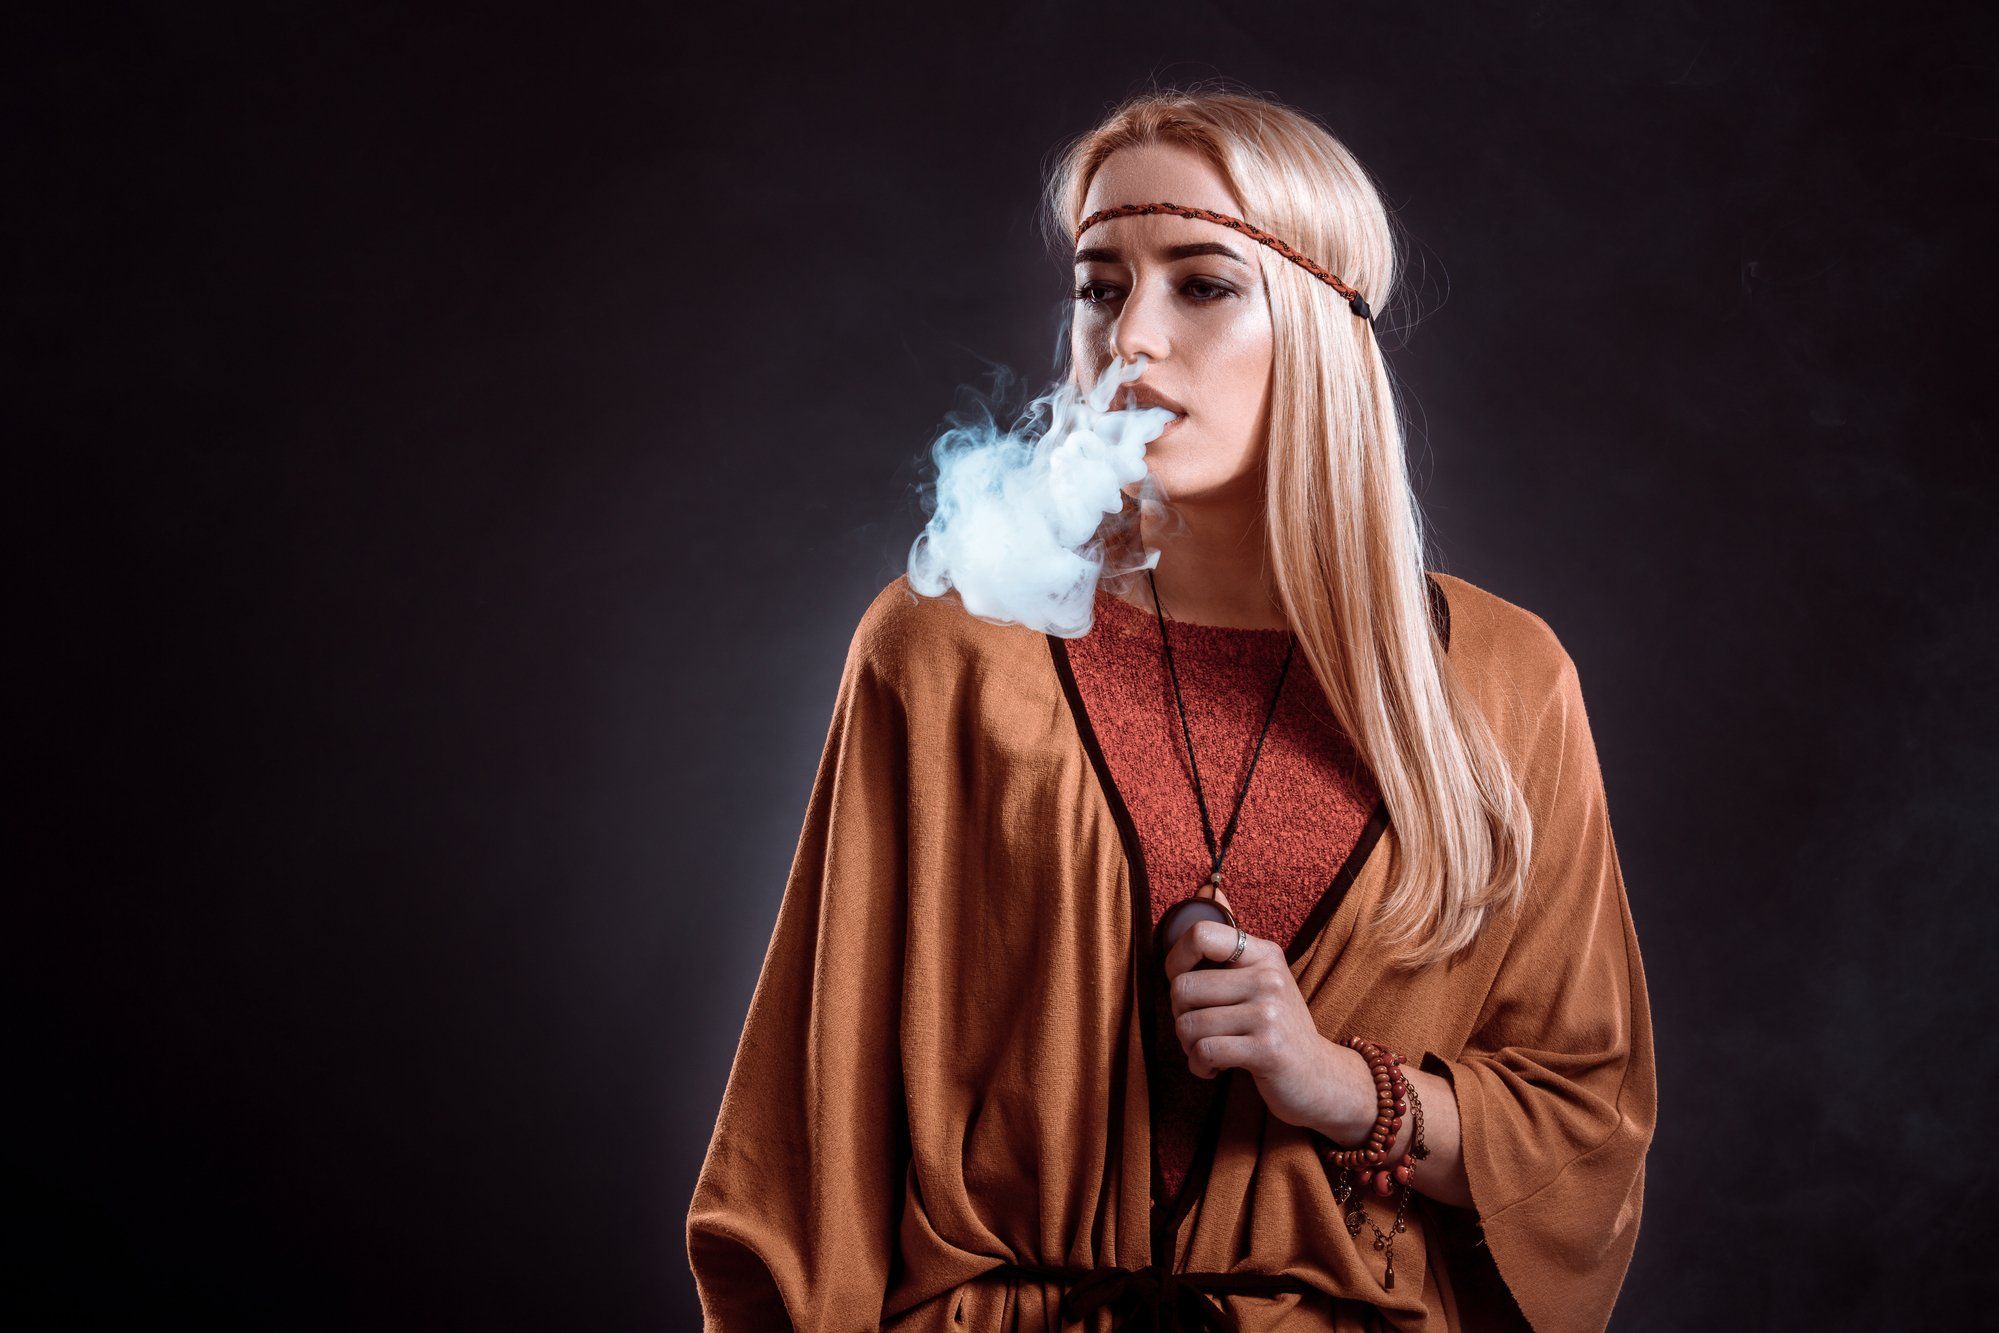 Young woman in Boho clothing vapes